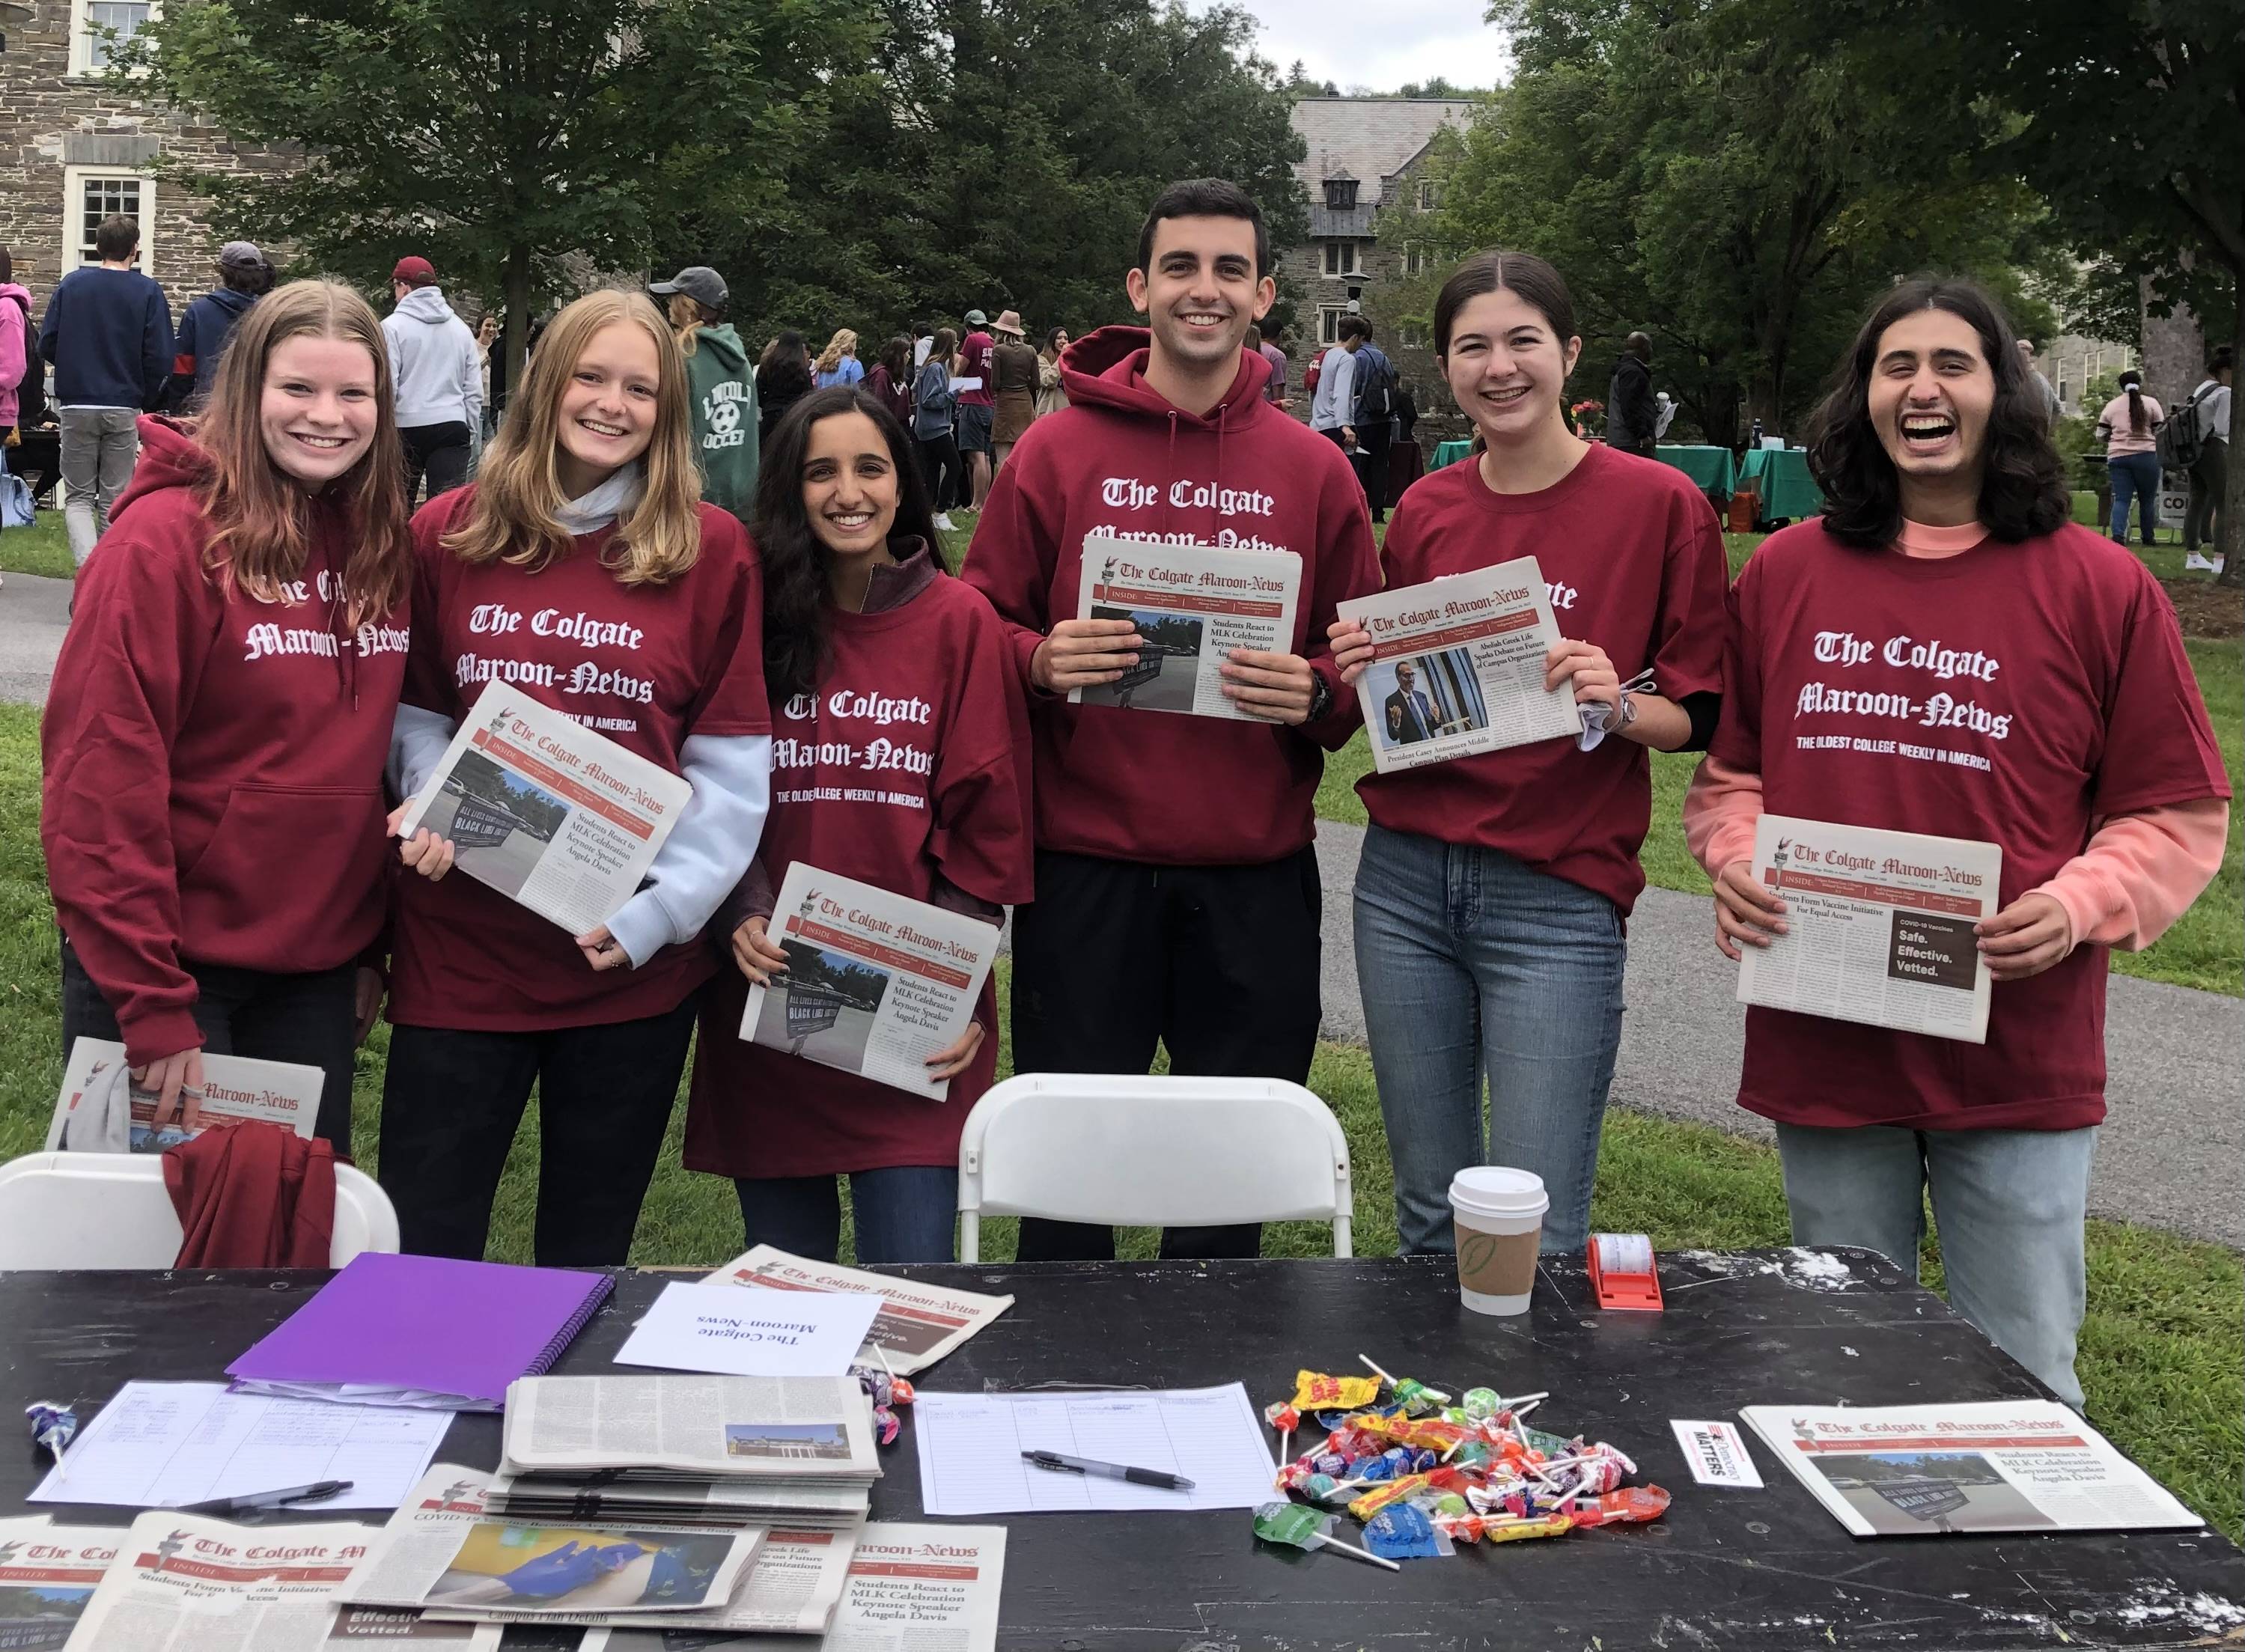 Jesse and fellow Maroon News staff recruiting new writers at the fall 2021 club fair